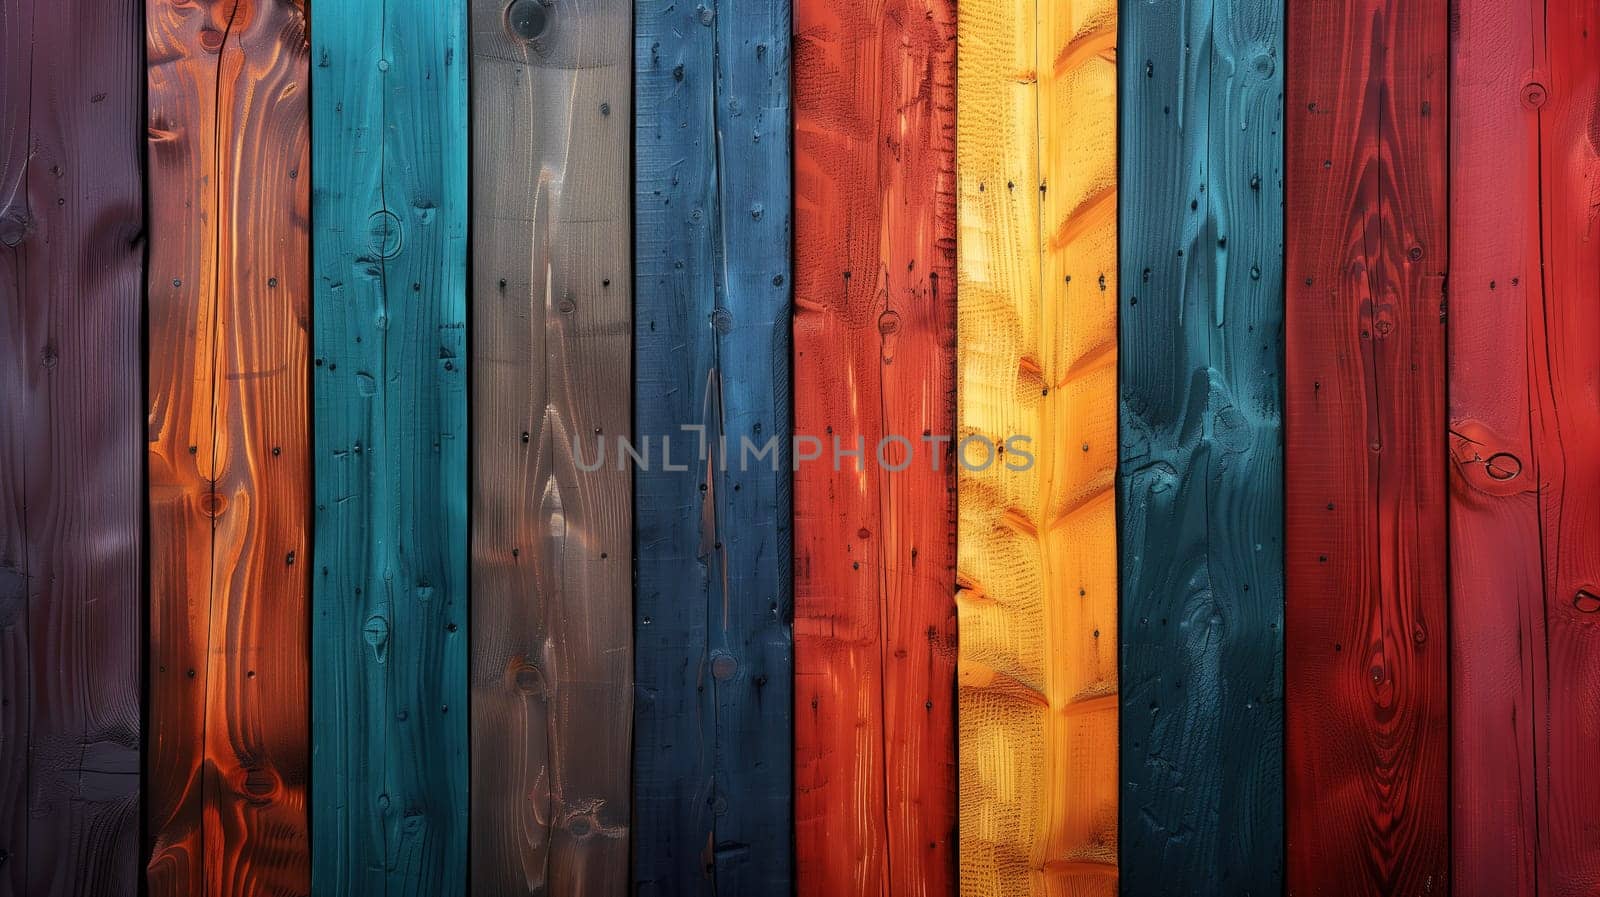 A wooden fence painted in the vibrant colors of the rainbow, signifying LGBT pride and diversity. The red, orange, yellow, green, blue, and purple hues create a bold and visually striking display.